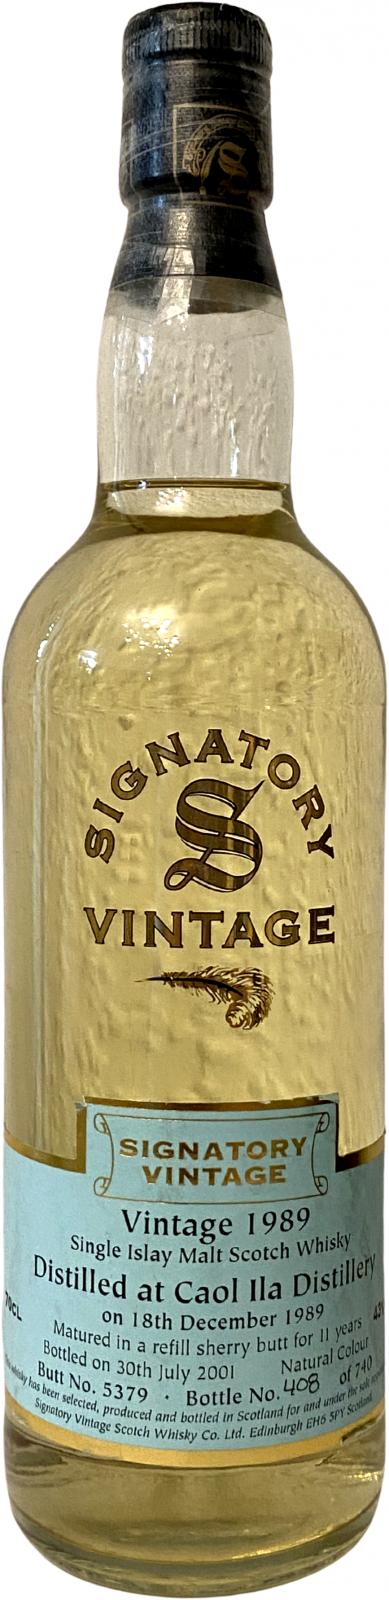 Caol Ila 1989 SV Vintage Collection Refill Sherry Butt #5379 43% 700ml